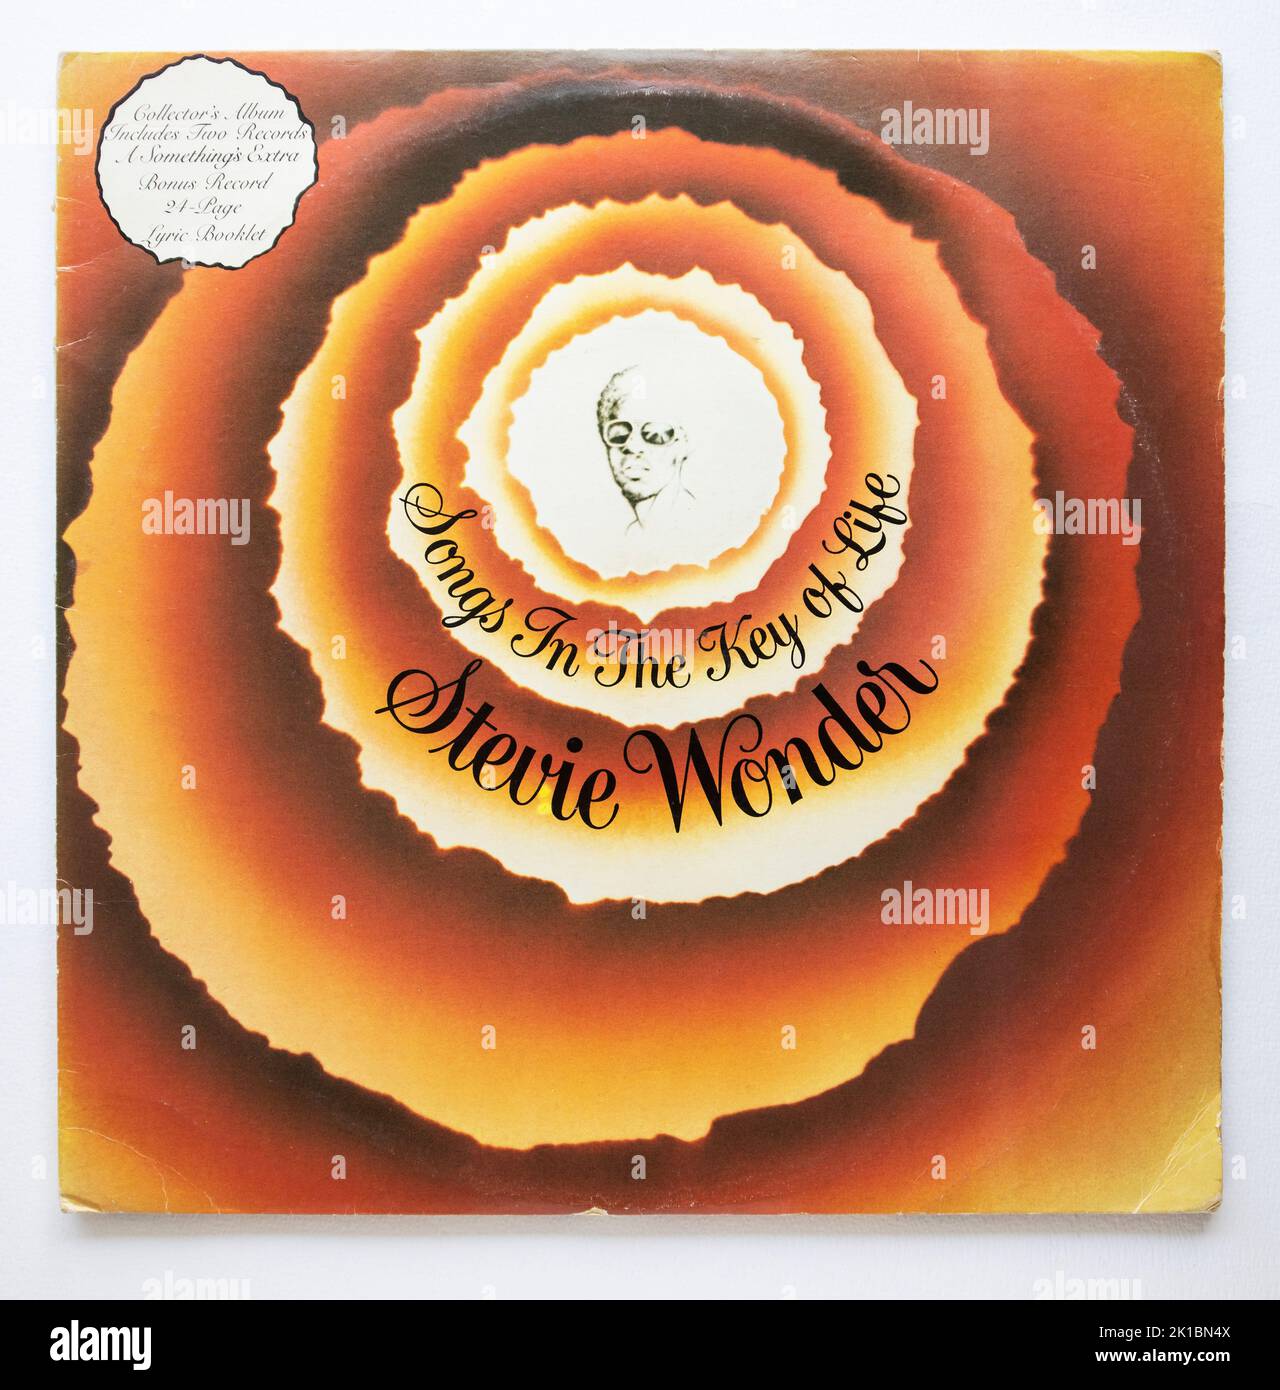 LP cover of Songs in the Key of Life, the 18th studio album by Stevie Wonder, which was released in 1976 Stock Photo